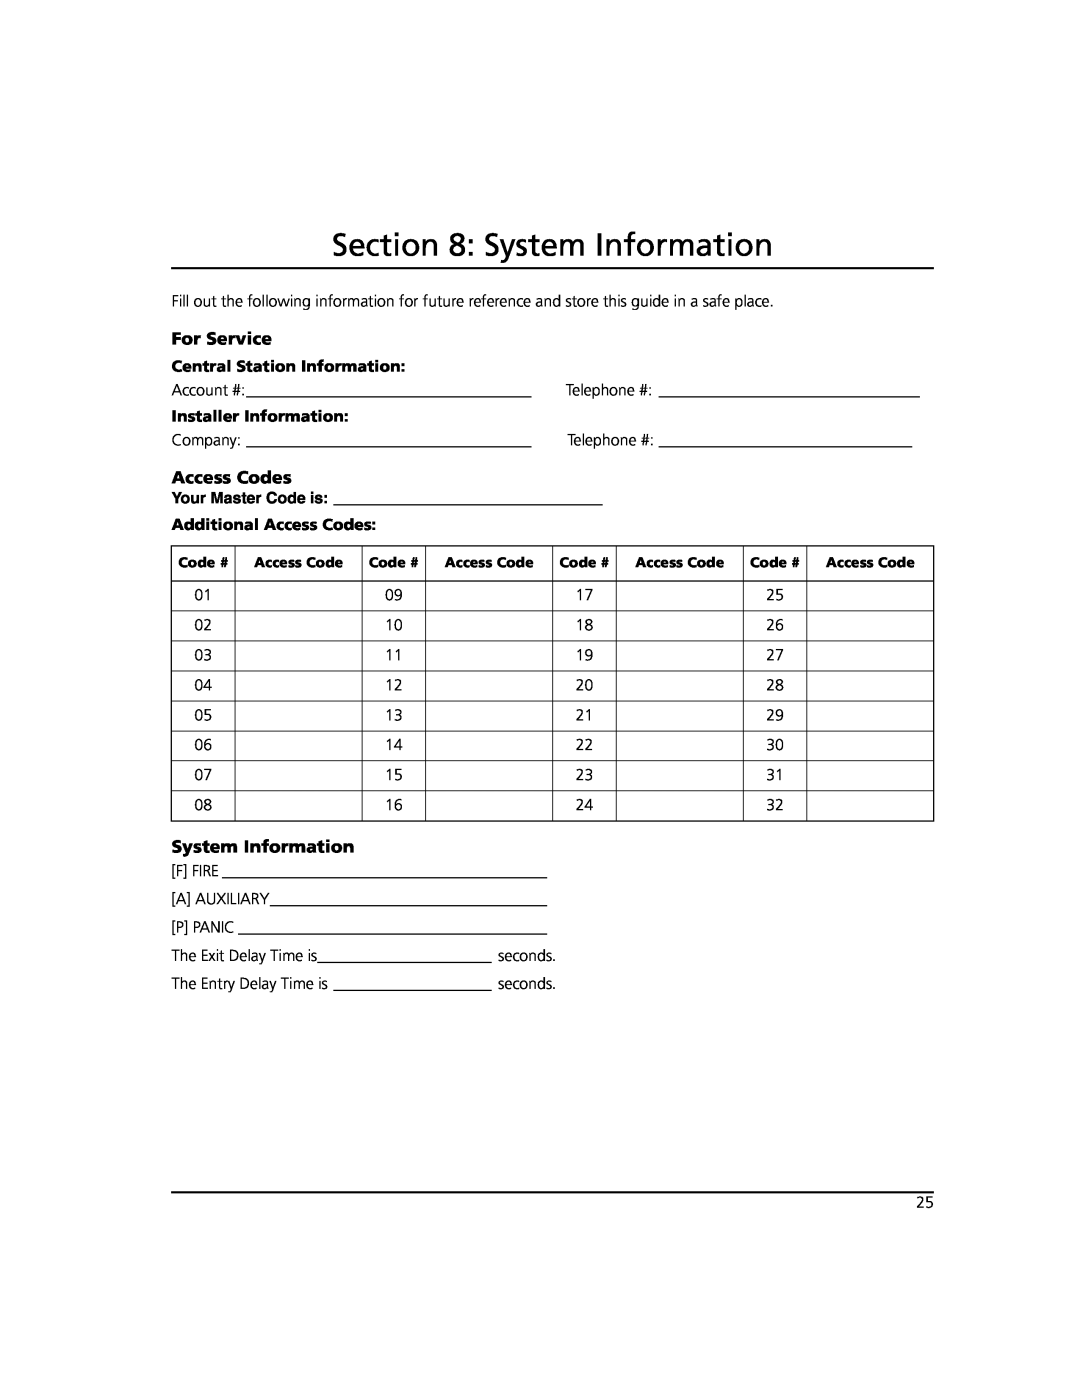 ADT Security Services Power 864 manual System Information, For Service, Access Codes, Central Station Information 